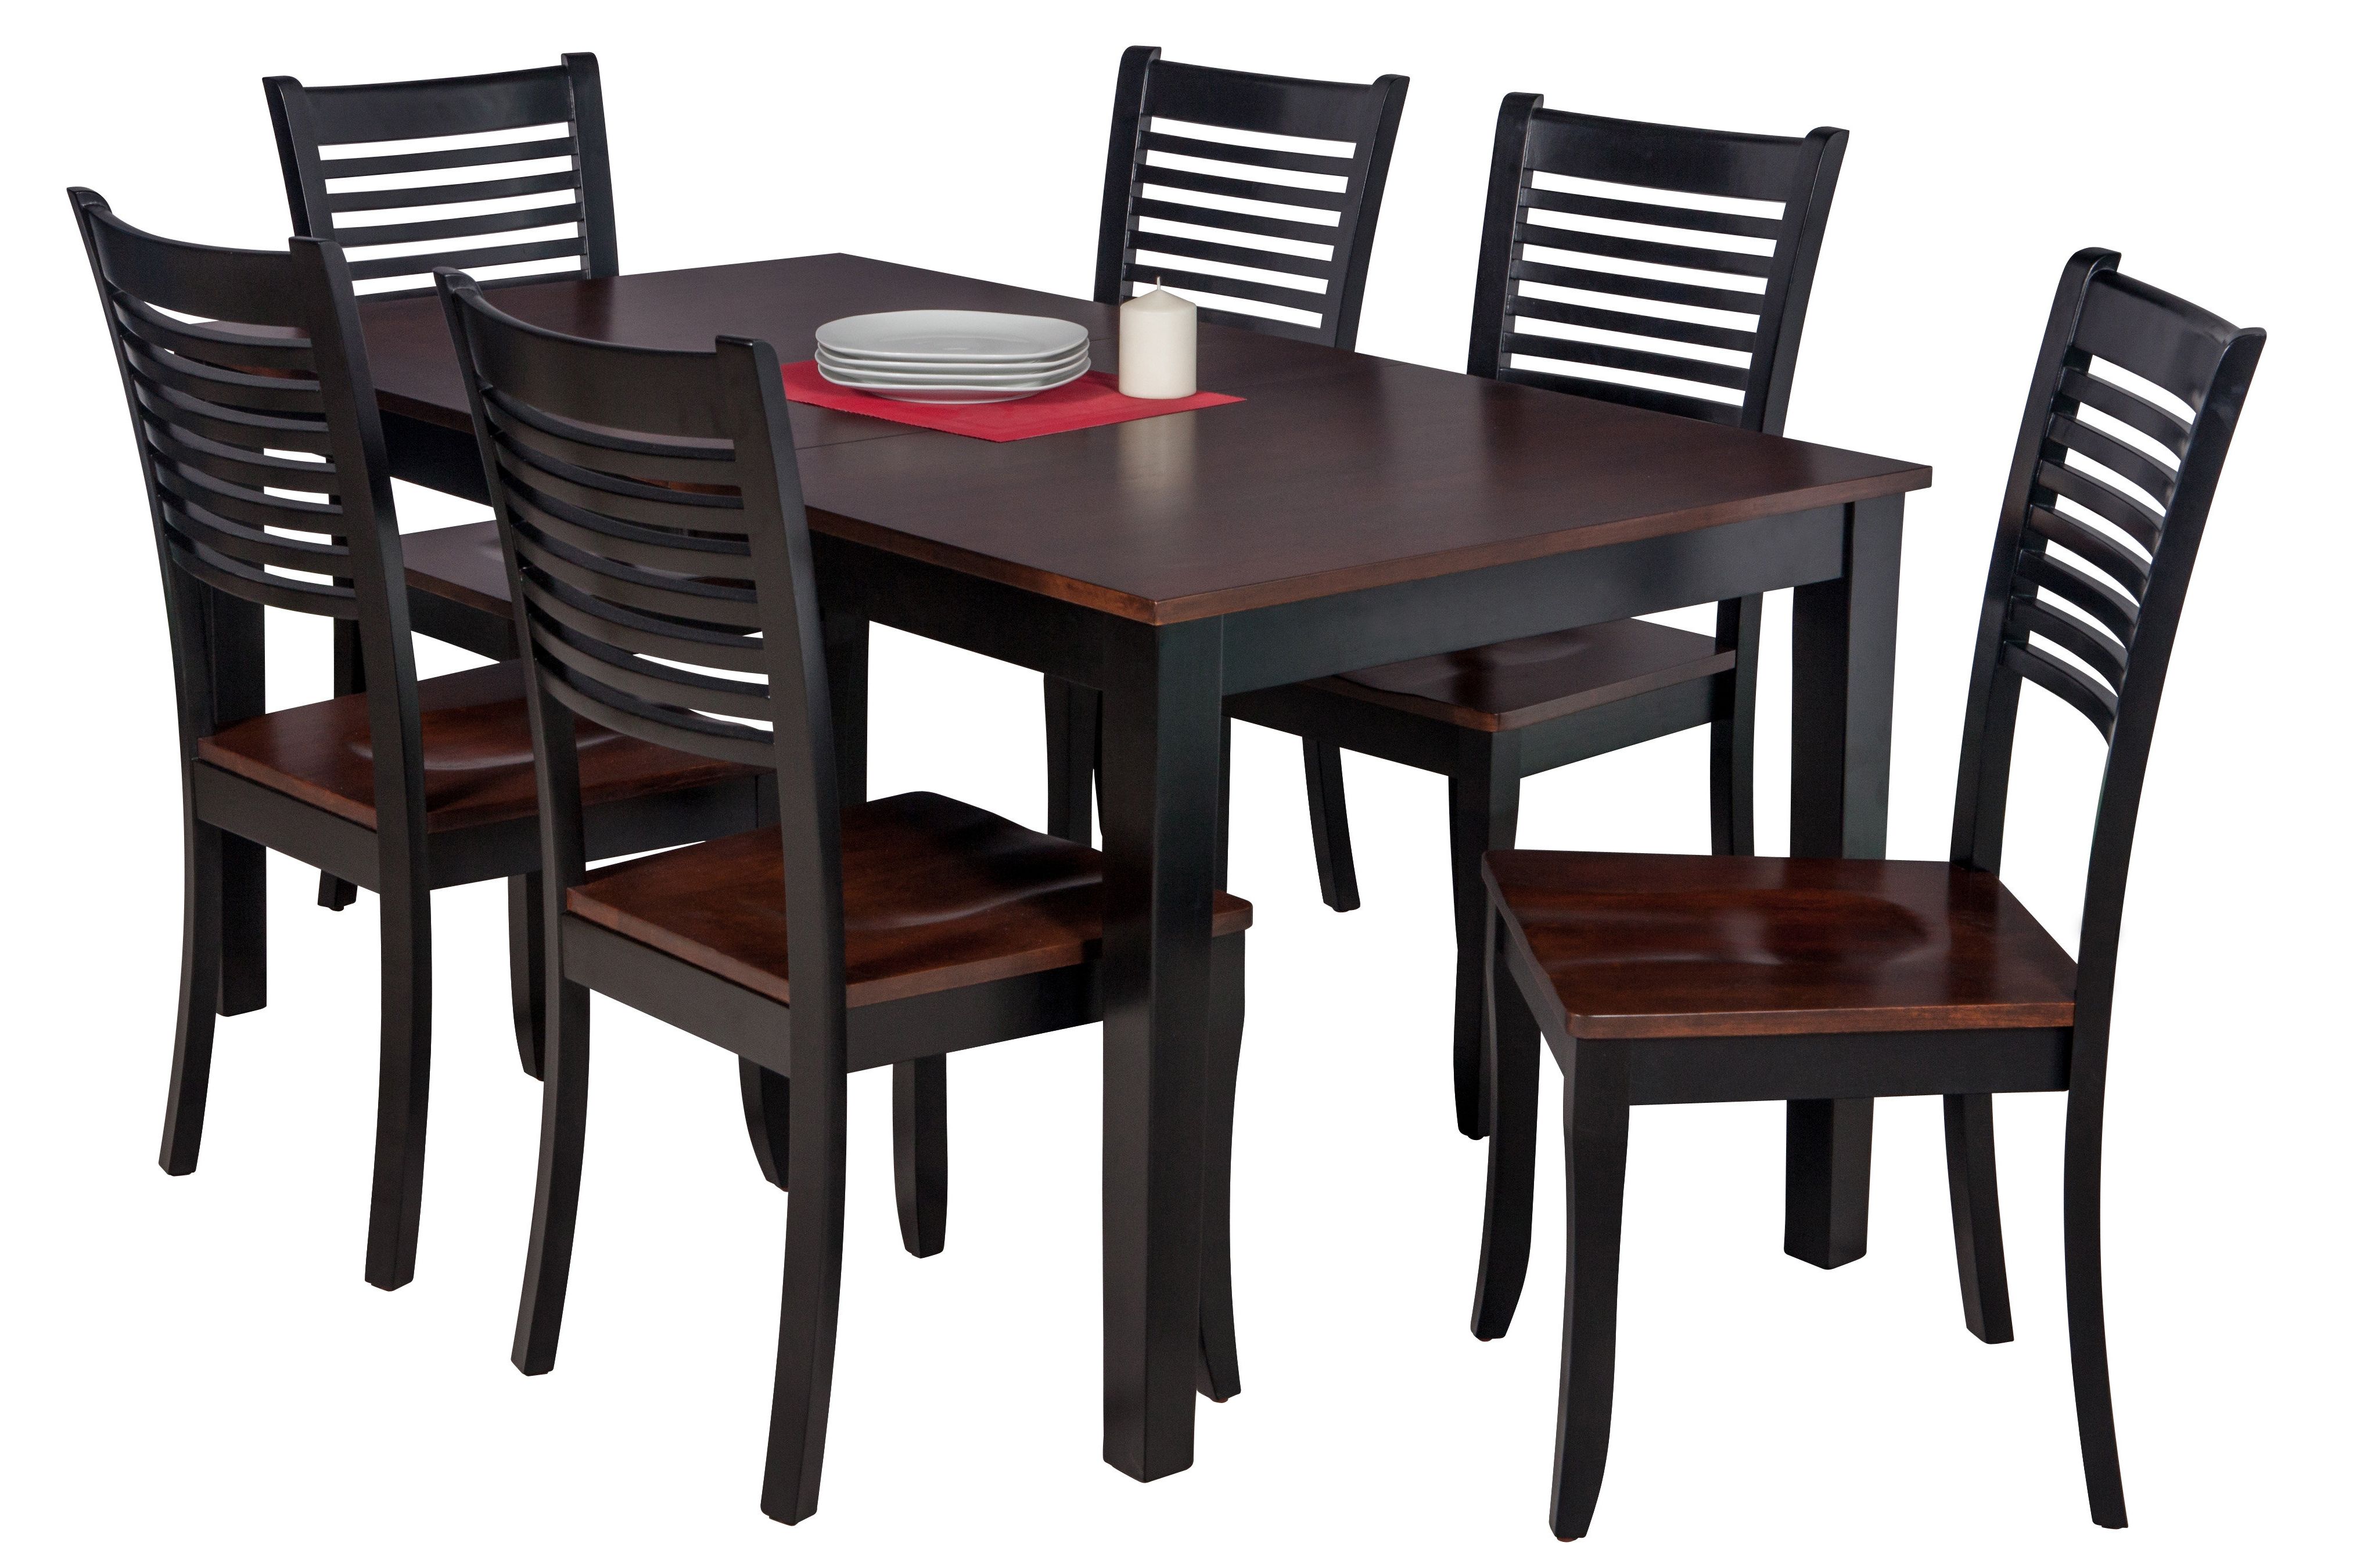 Preferred Loon Peak Downieville Lawson Dumont 7 Piece Solid Wood Dining Set Pertaining To Hanska Wooden 5 Piece Counter Height Dining Table Sets (set Of 5) (Photo 16 of 25)